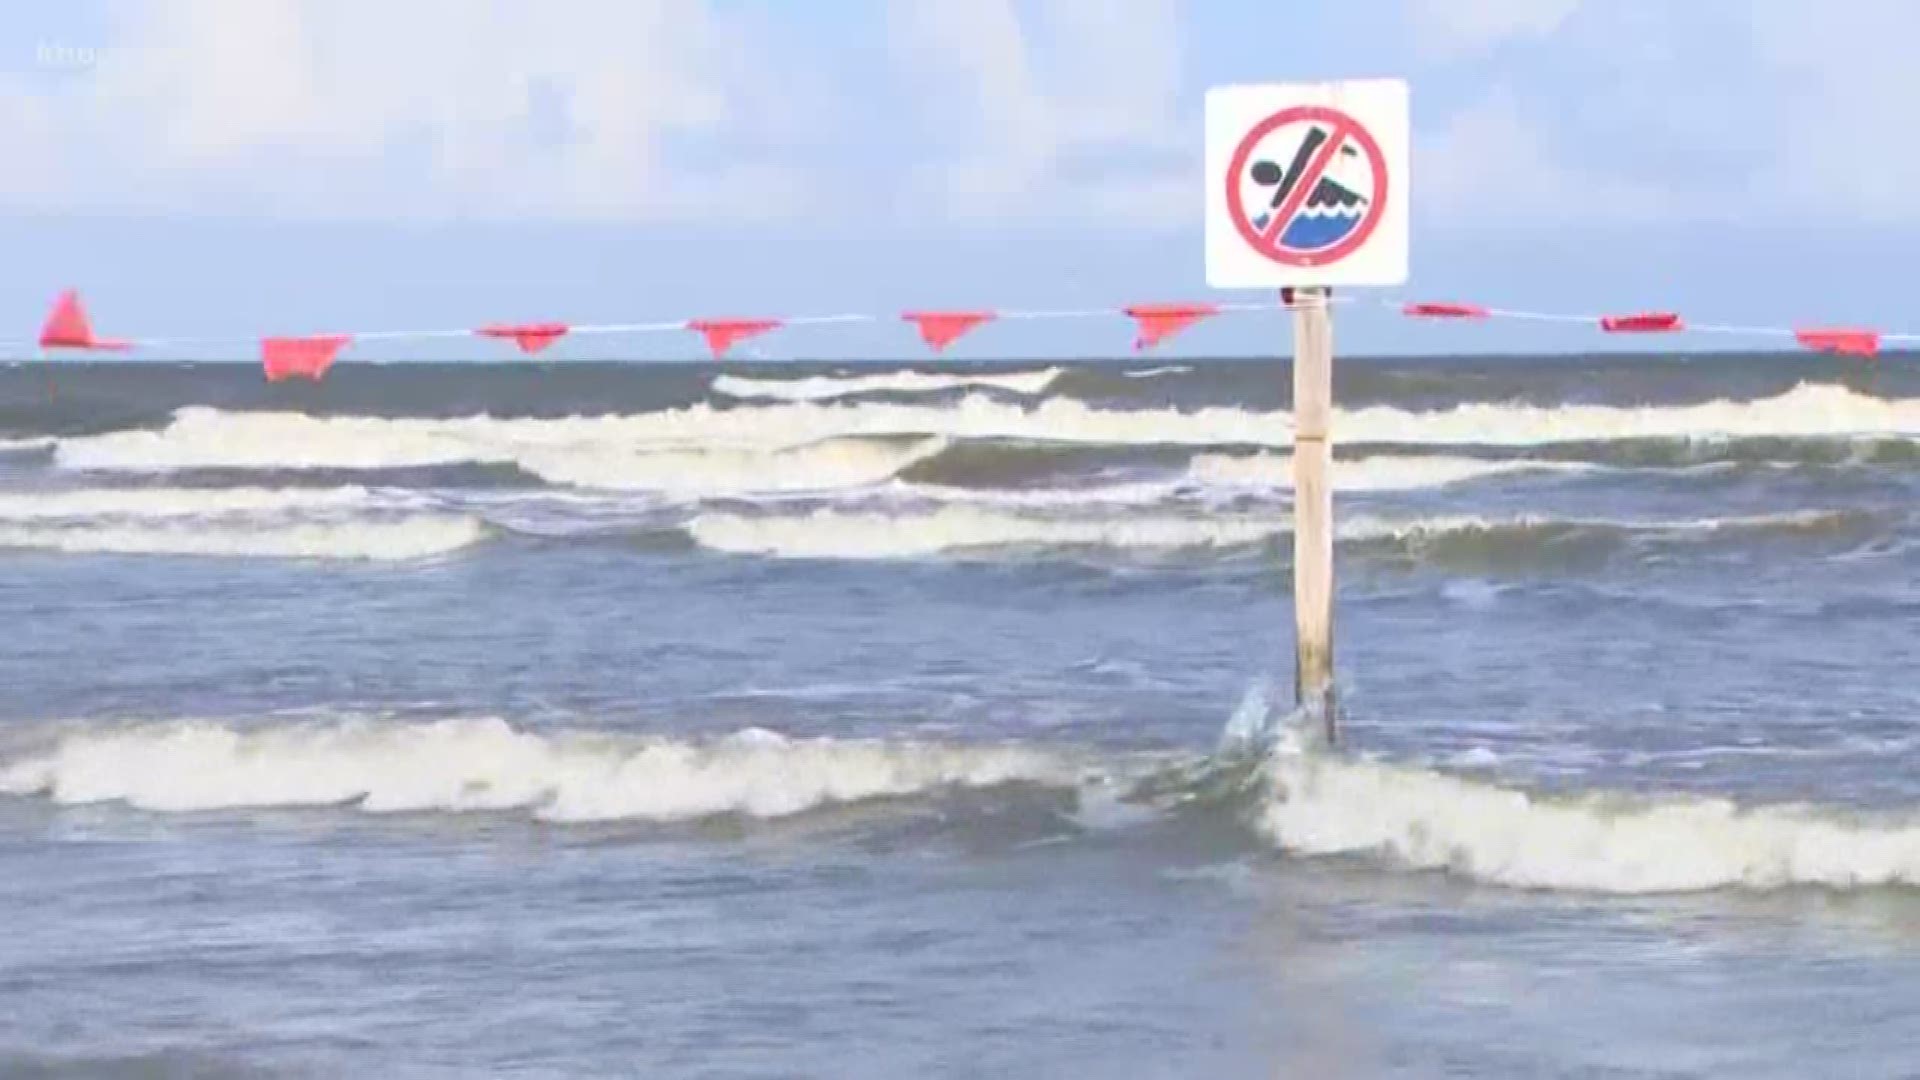 The strong breeze actually made it feel nice at the beach this weekend. But that's also why there's a red flag warning. Beach patrol says even adult swimmers should be careful and stay near lifeguard stands.